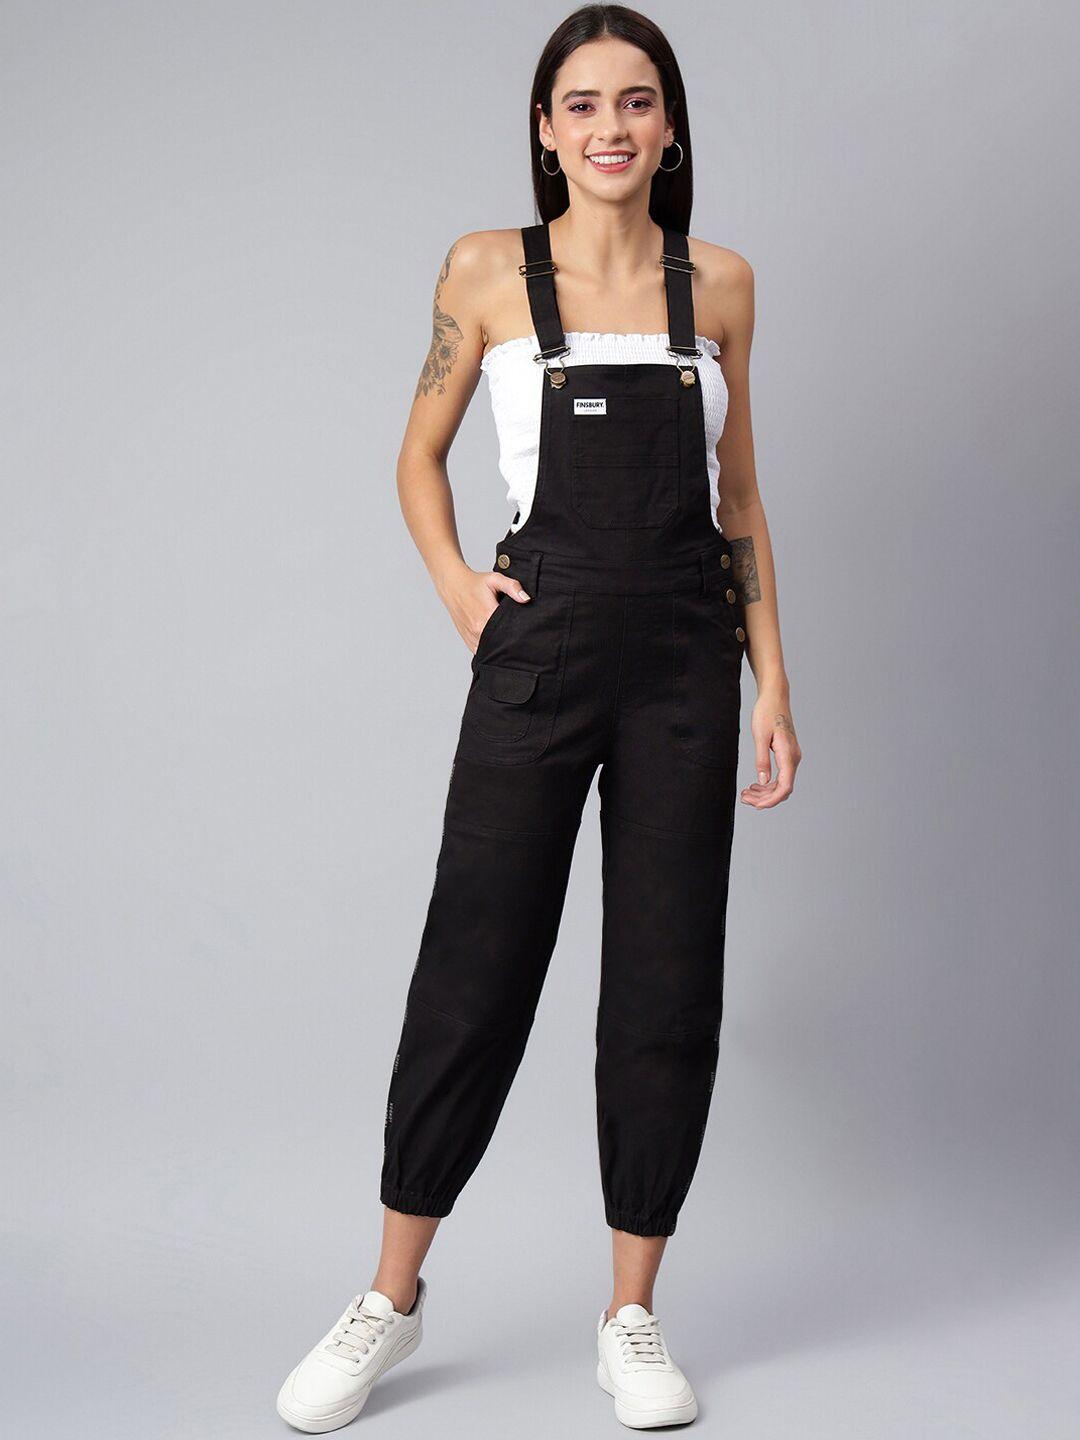 finsbury london women black solid cotton dungarees